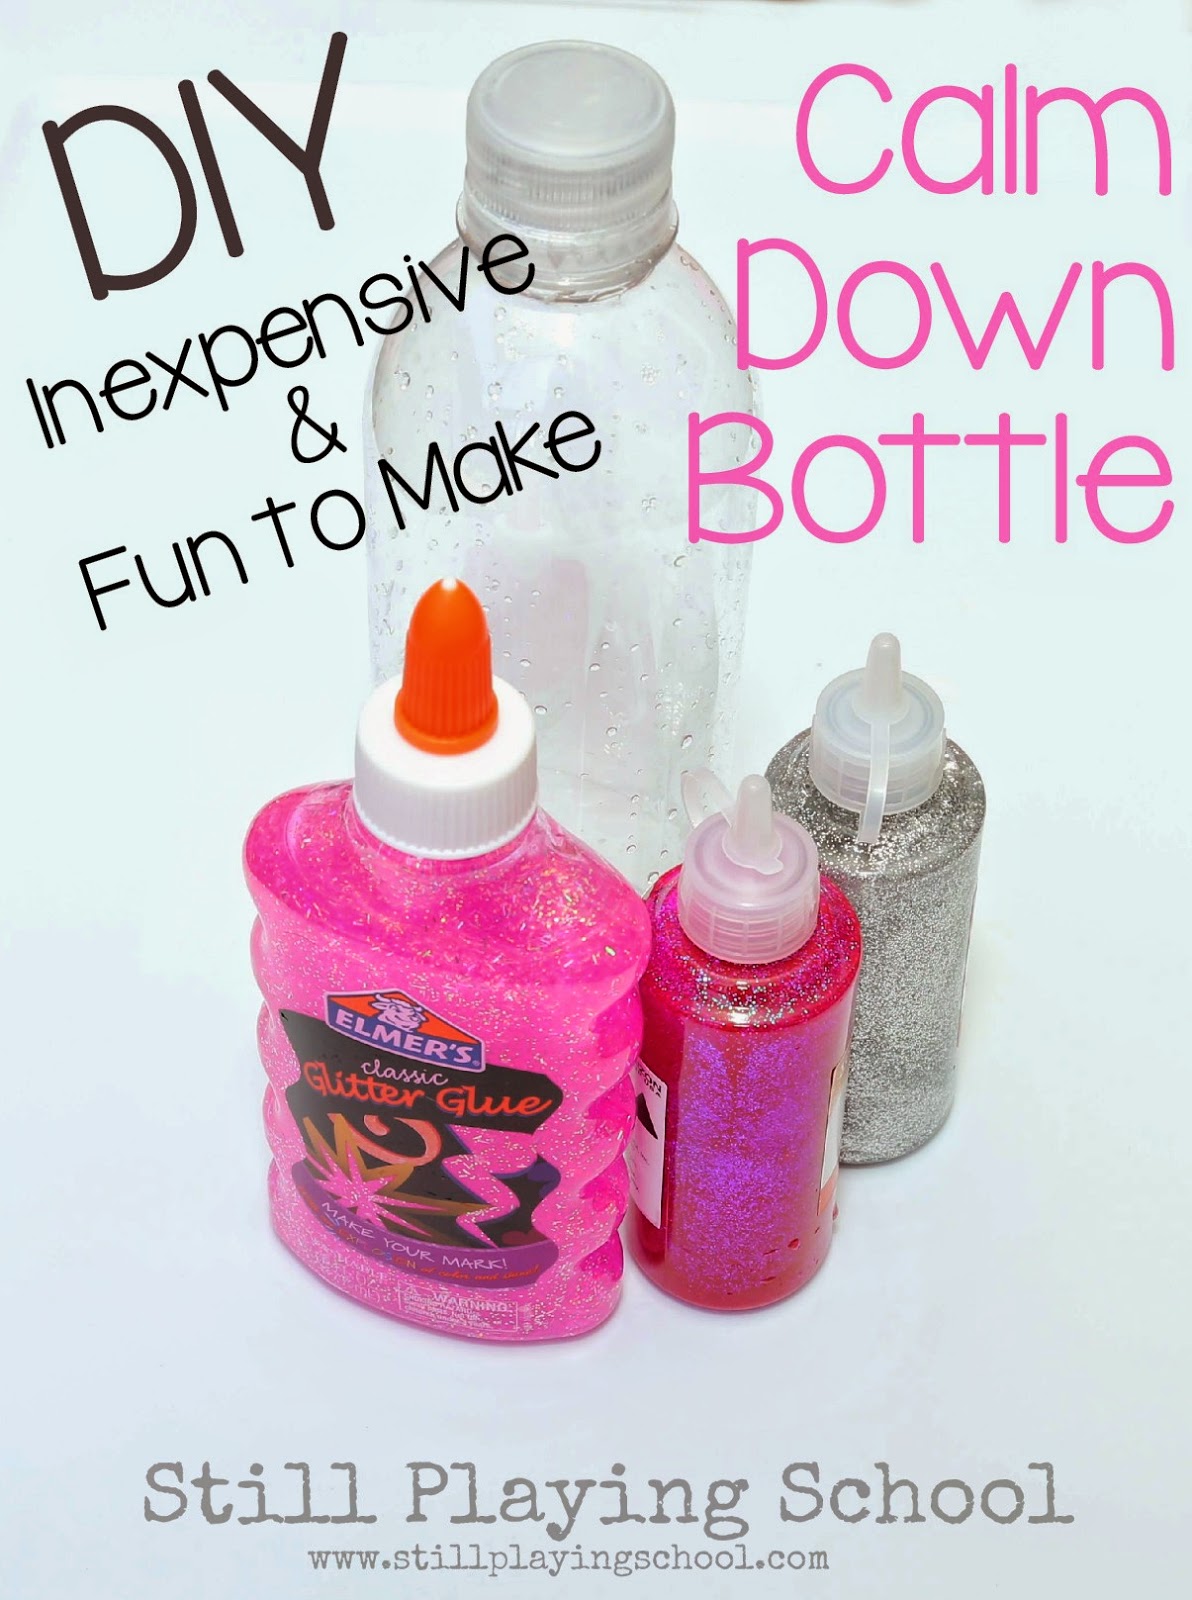 how-to-make-calm-down-bottle